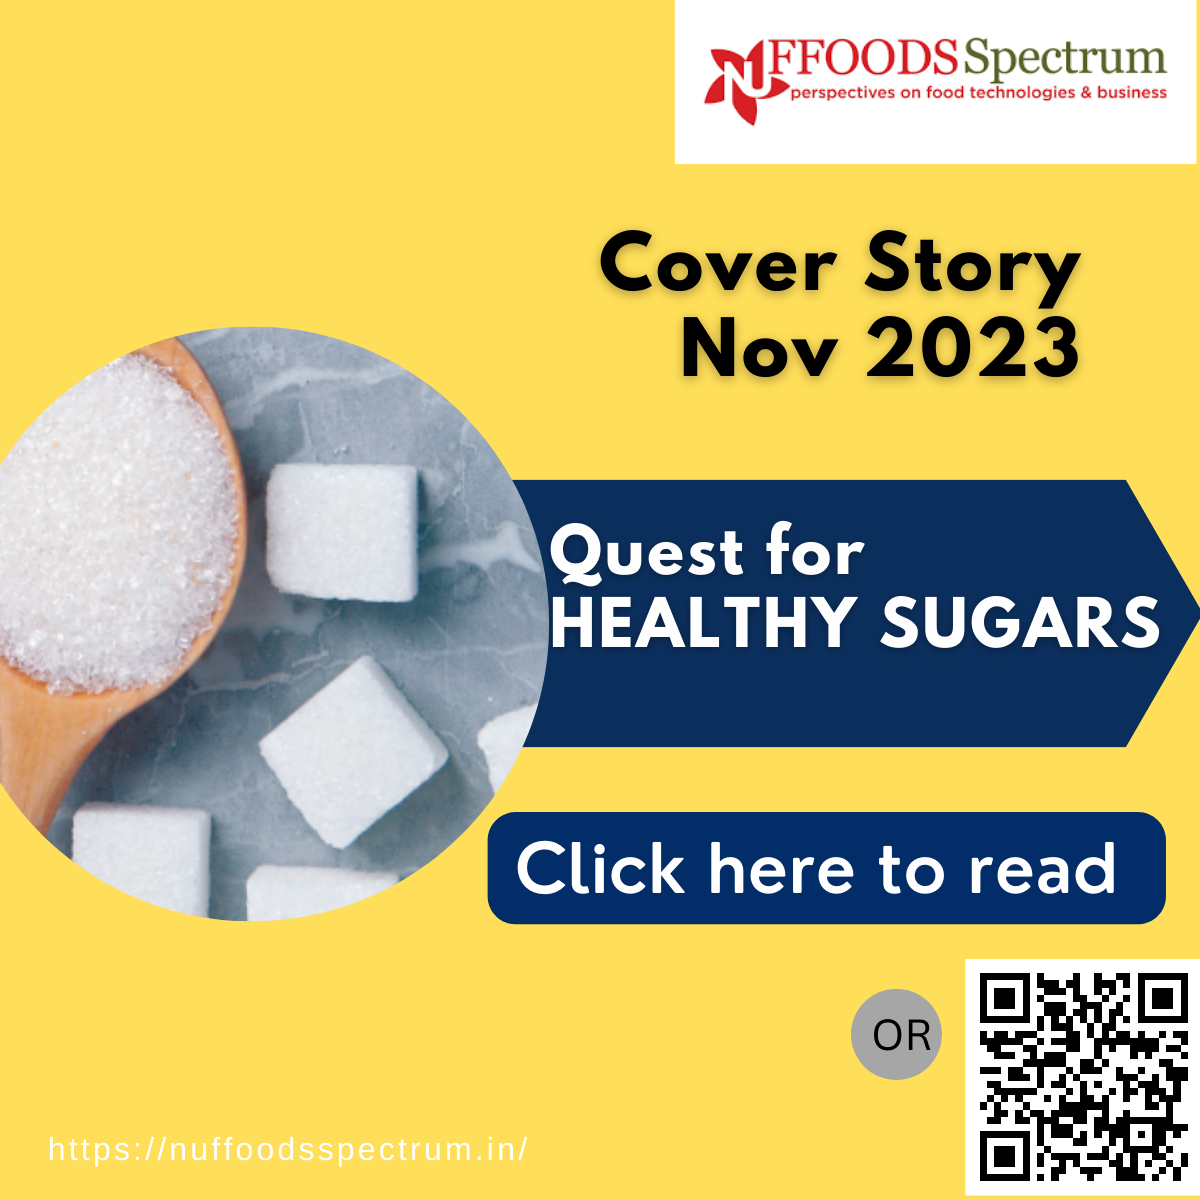 Quest for Healthy Sugars